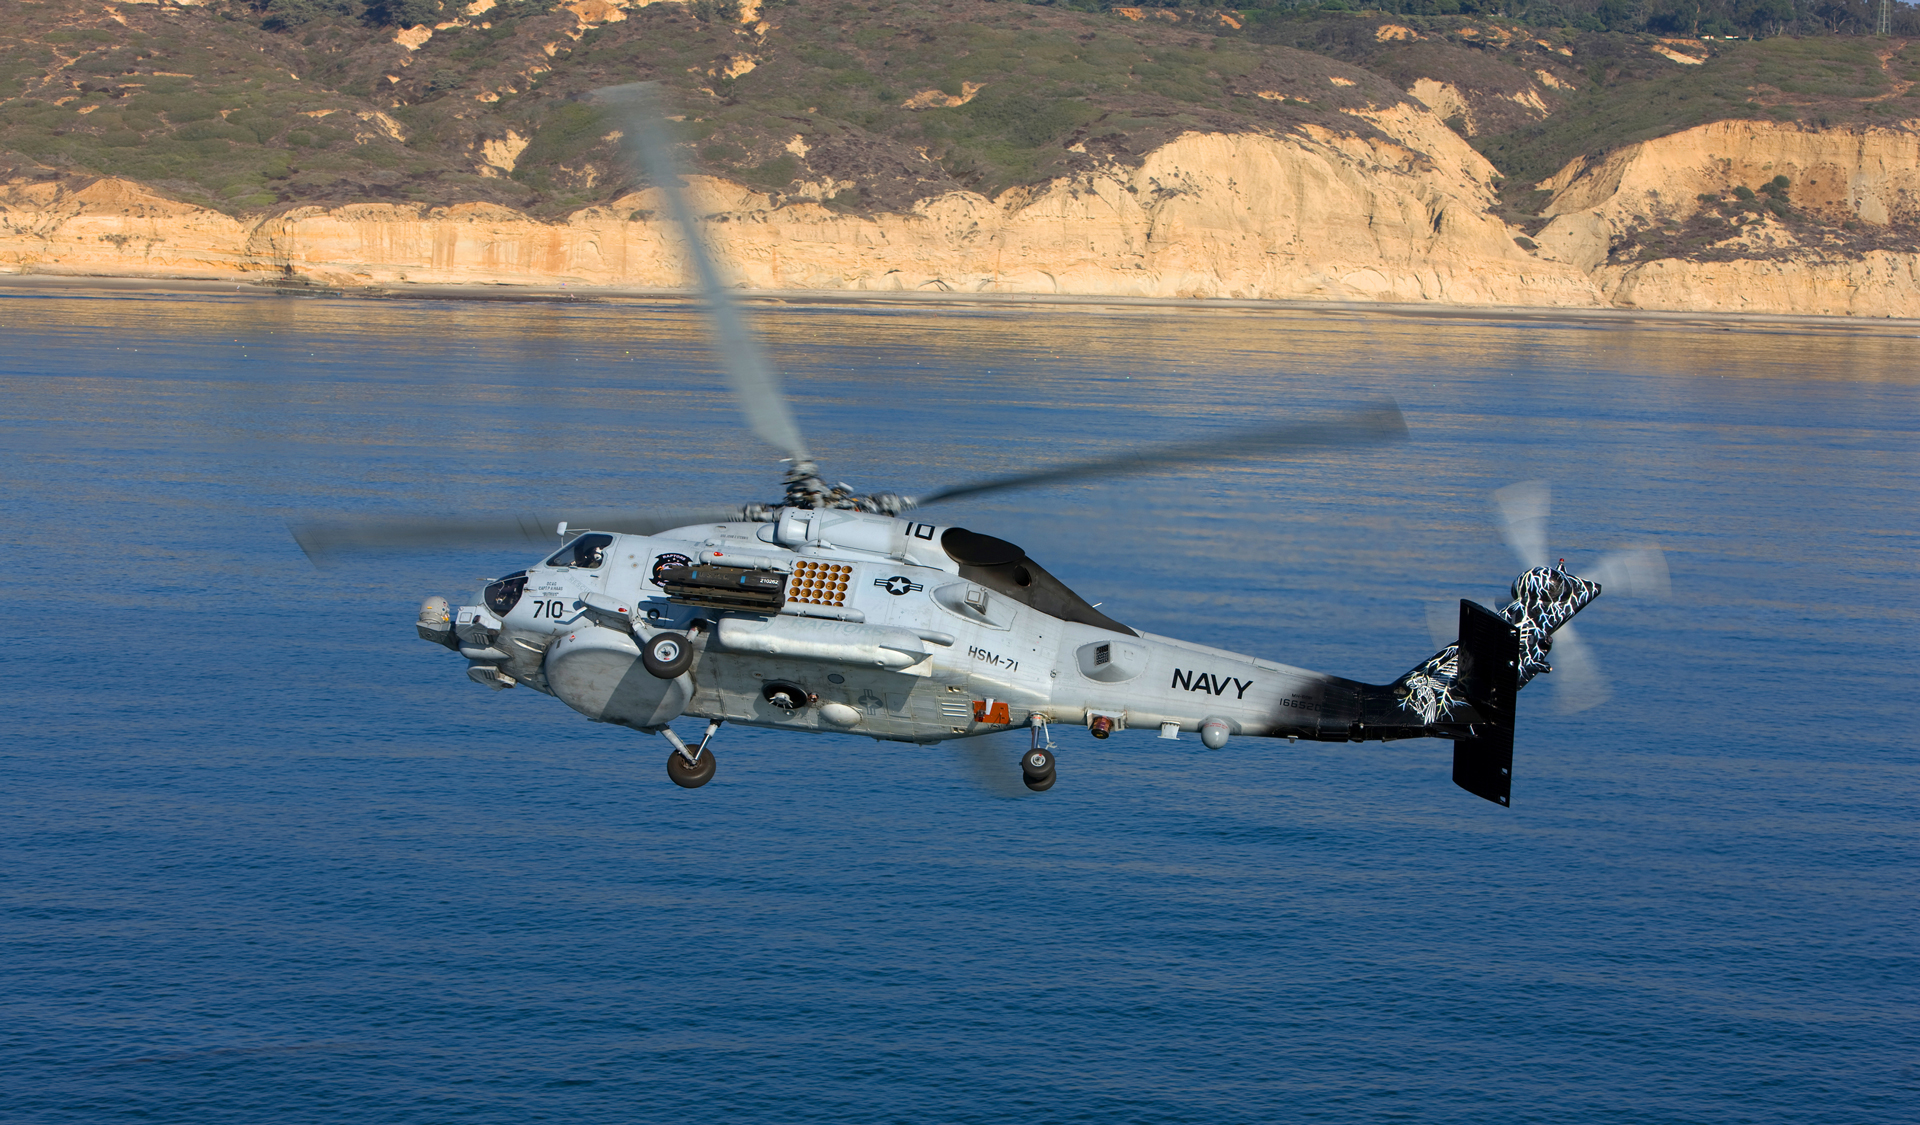 Lockheed Martin has received a contract award from the U.S. Navy to build eight MH-60R SEAHAWK helicopters for the Spanish Navy. Pictured: a U.S. Navy MH-60R aircraft. 